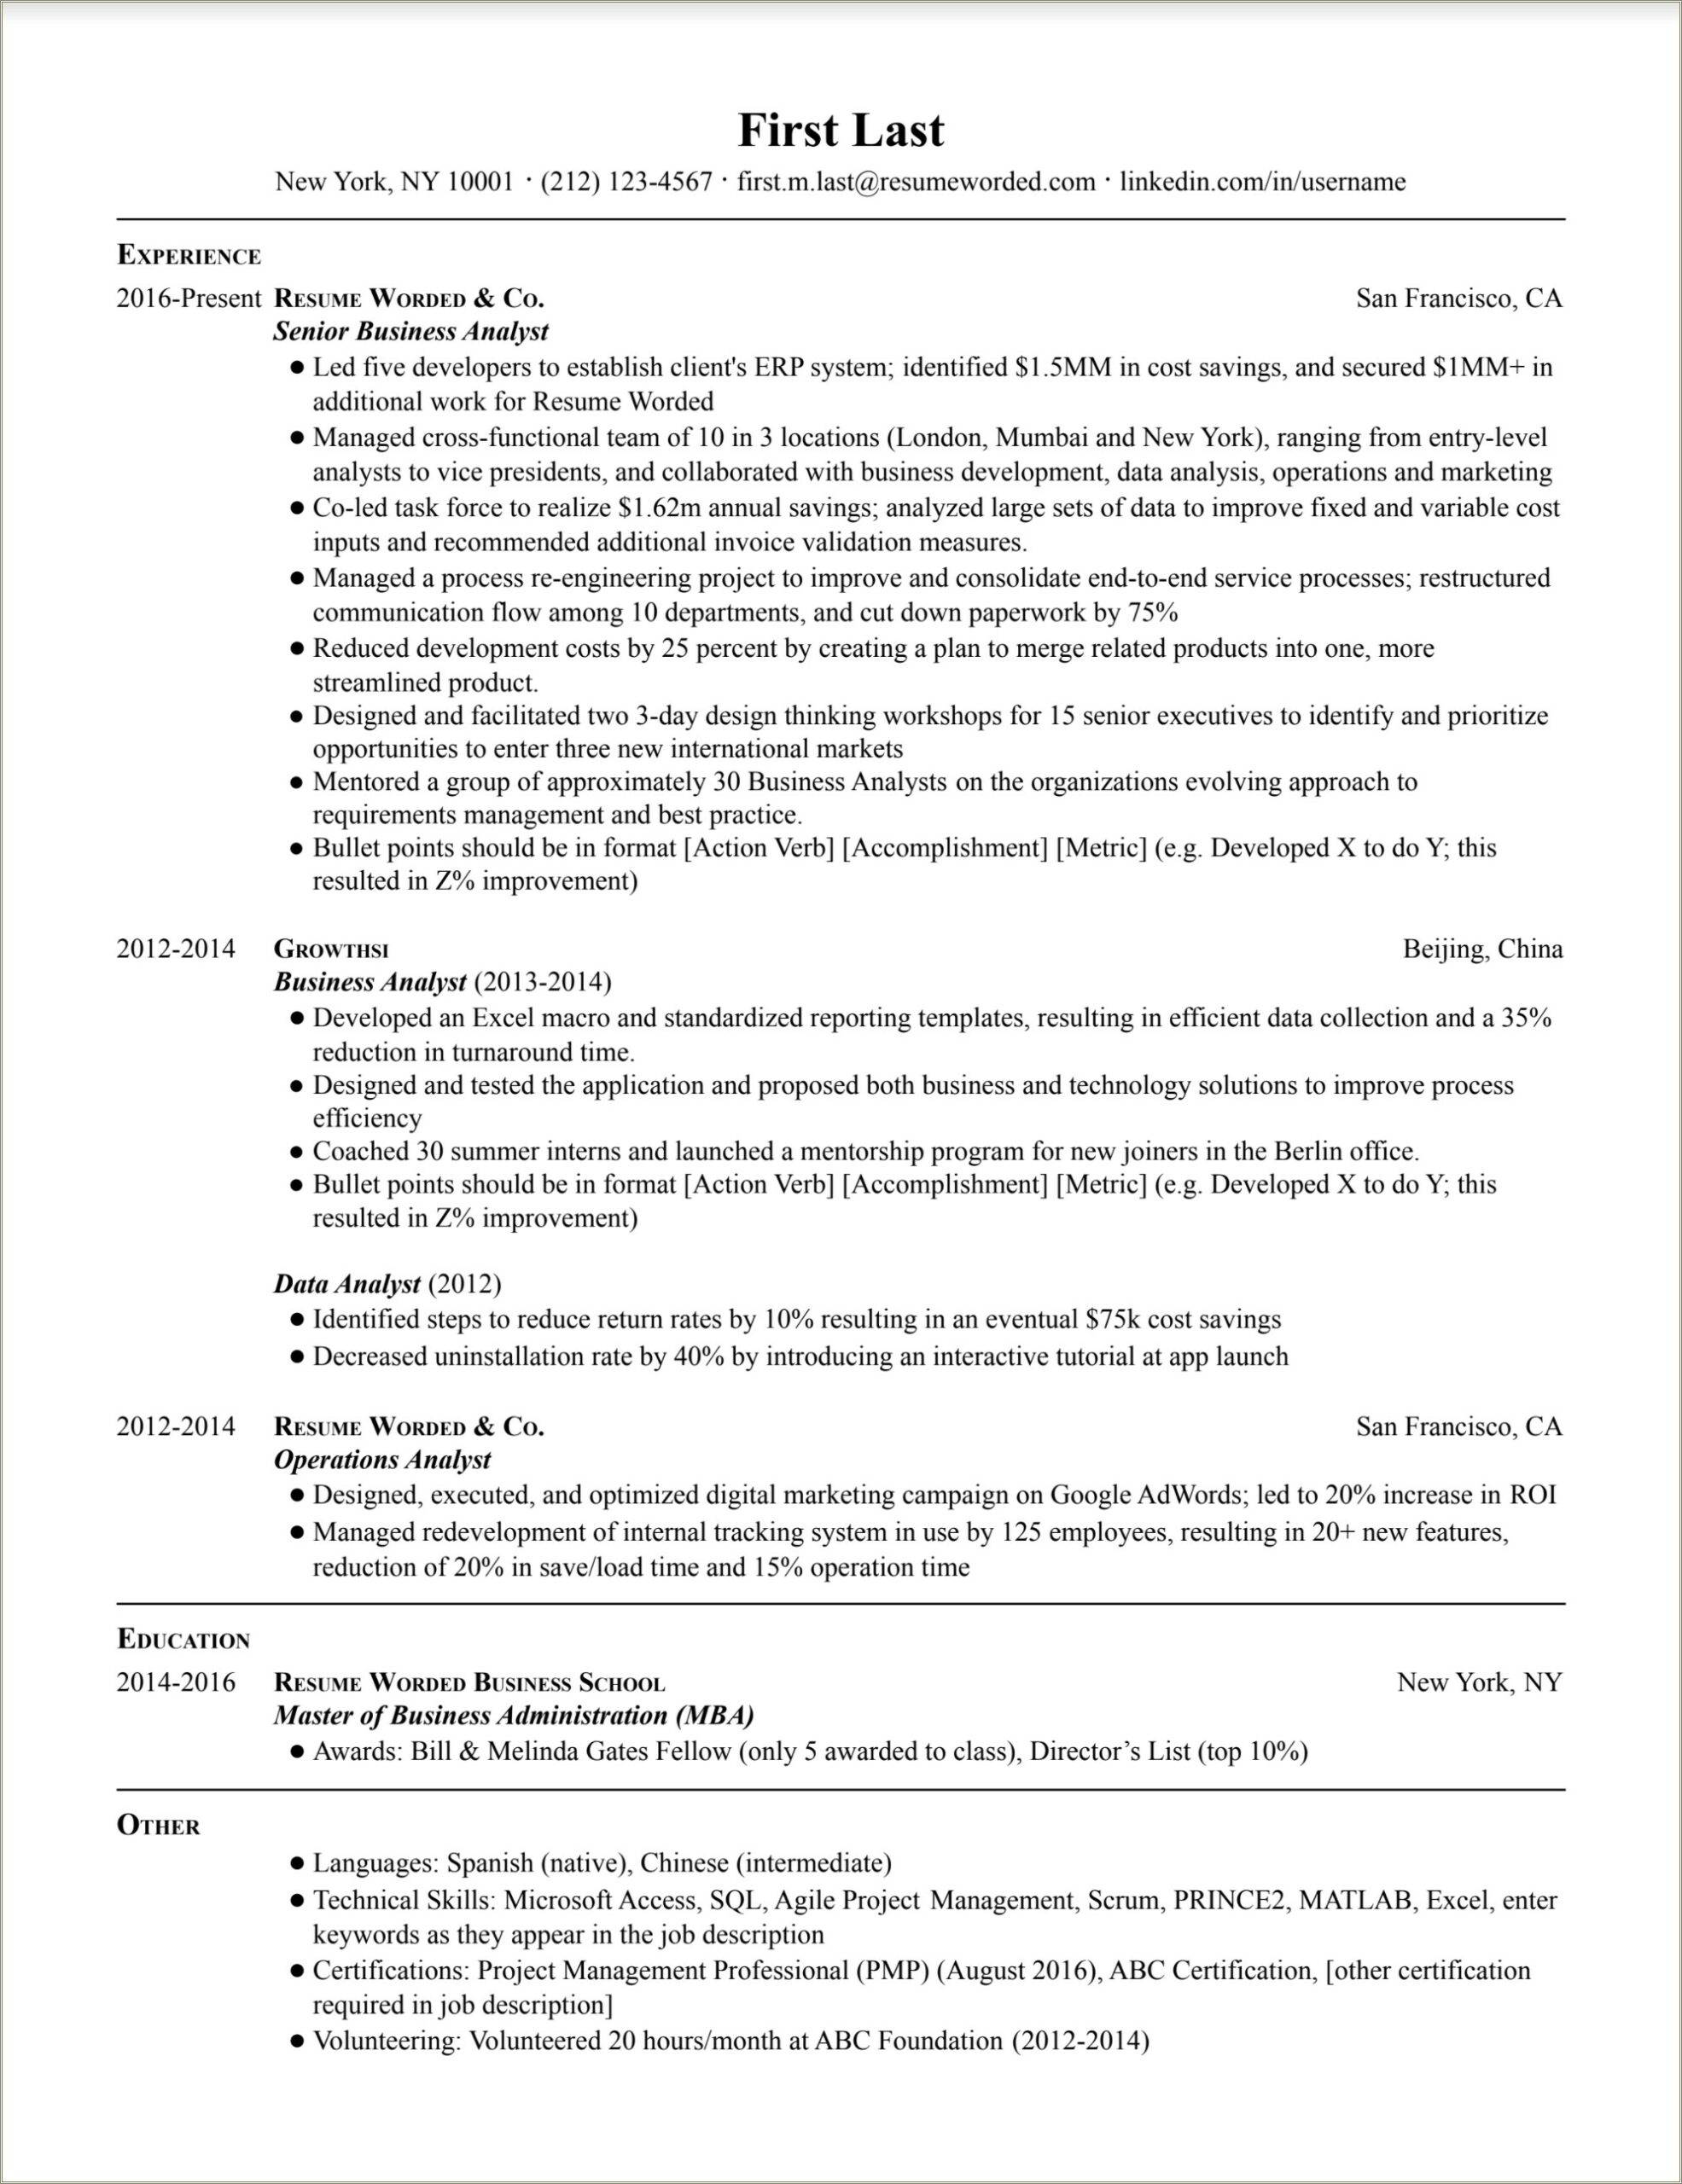 Resume Objective To Work For Google